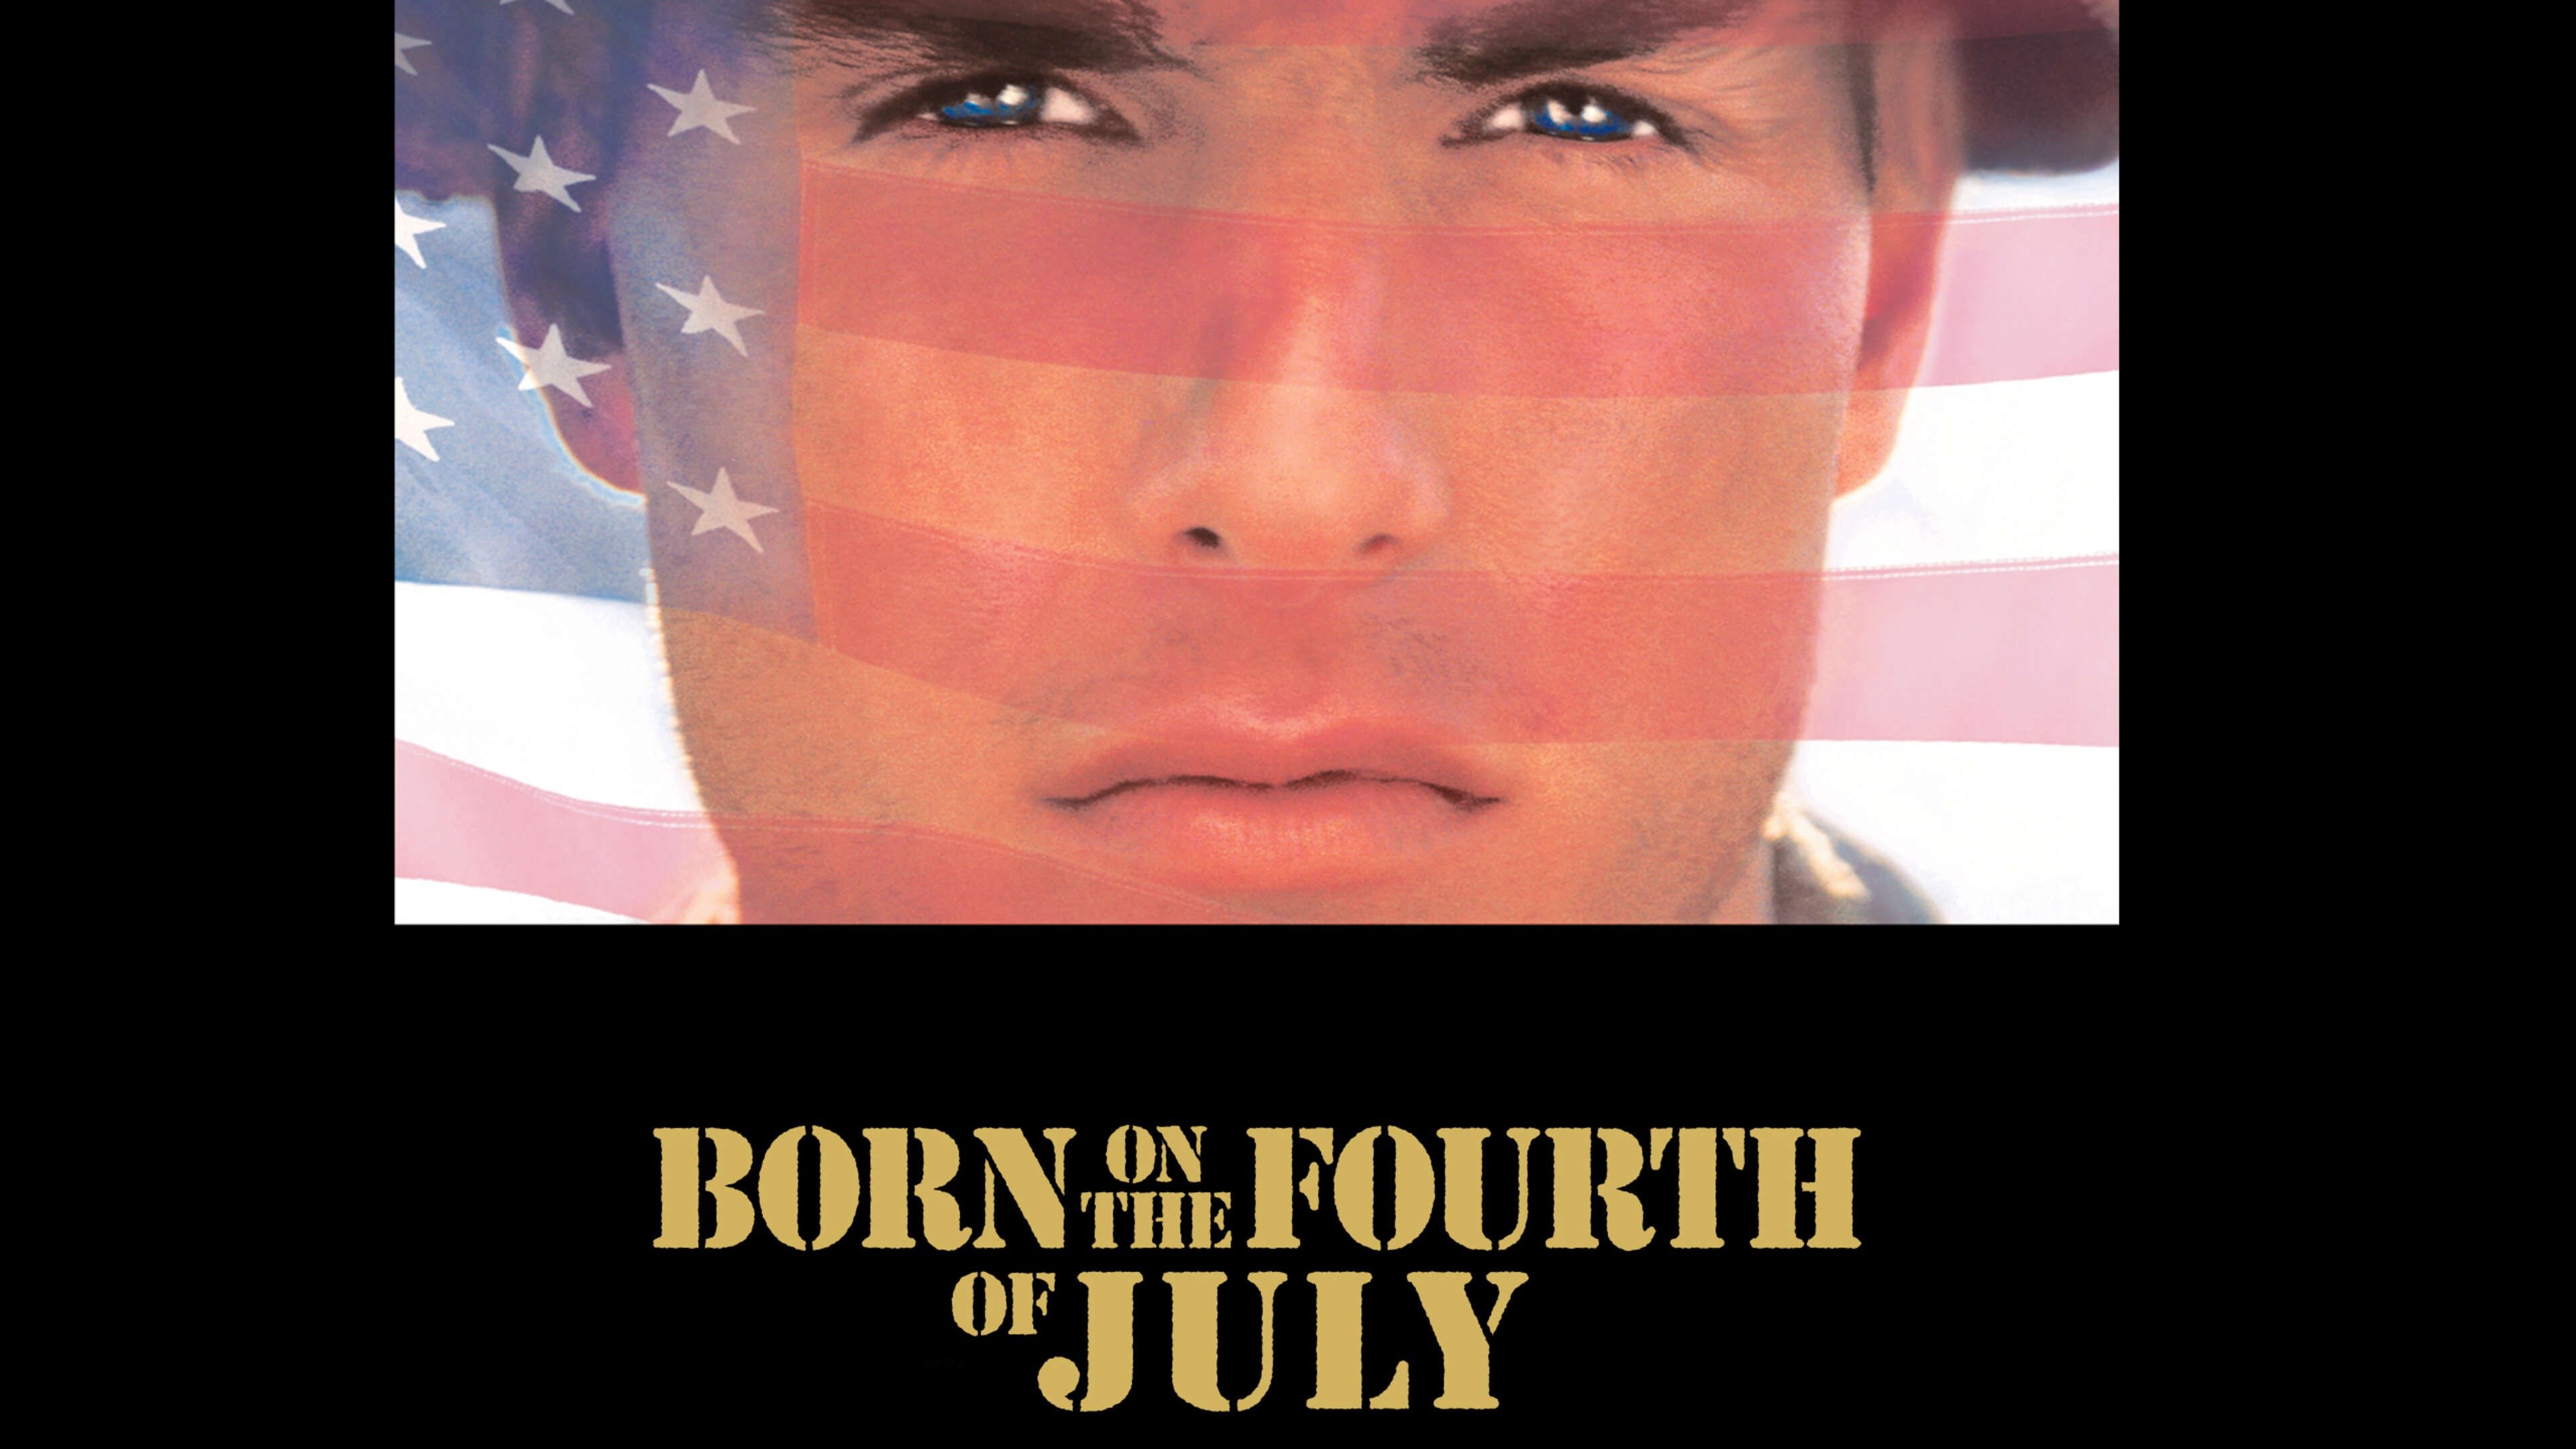 Born on the Fourth of July: Official Clip - You Never Killed a Baby! - Trailers & Videos 